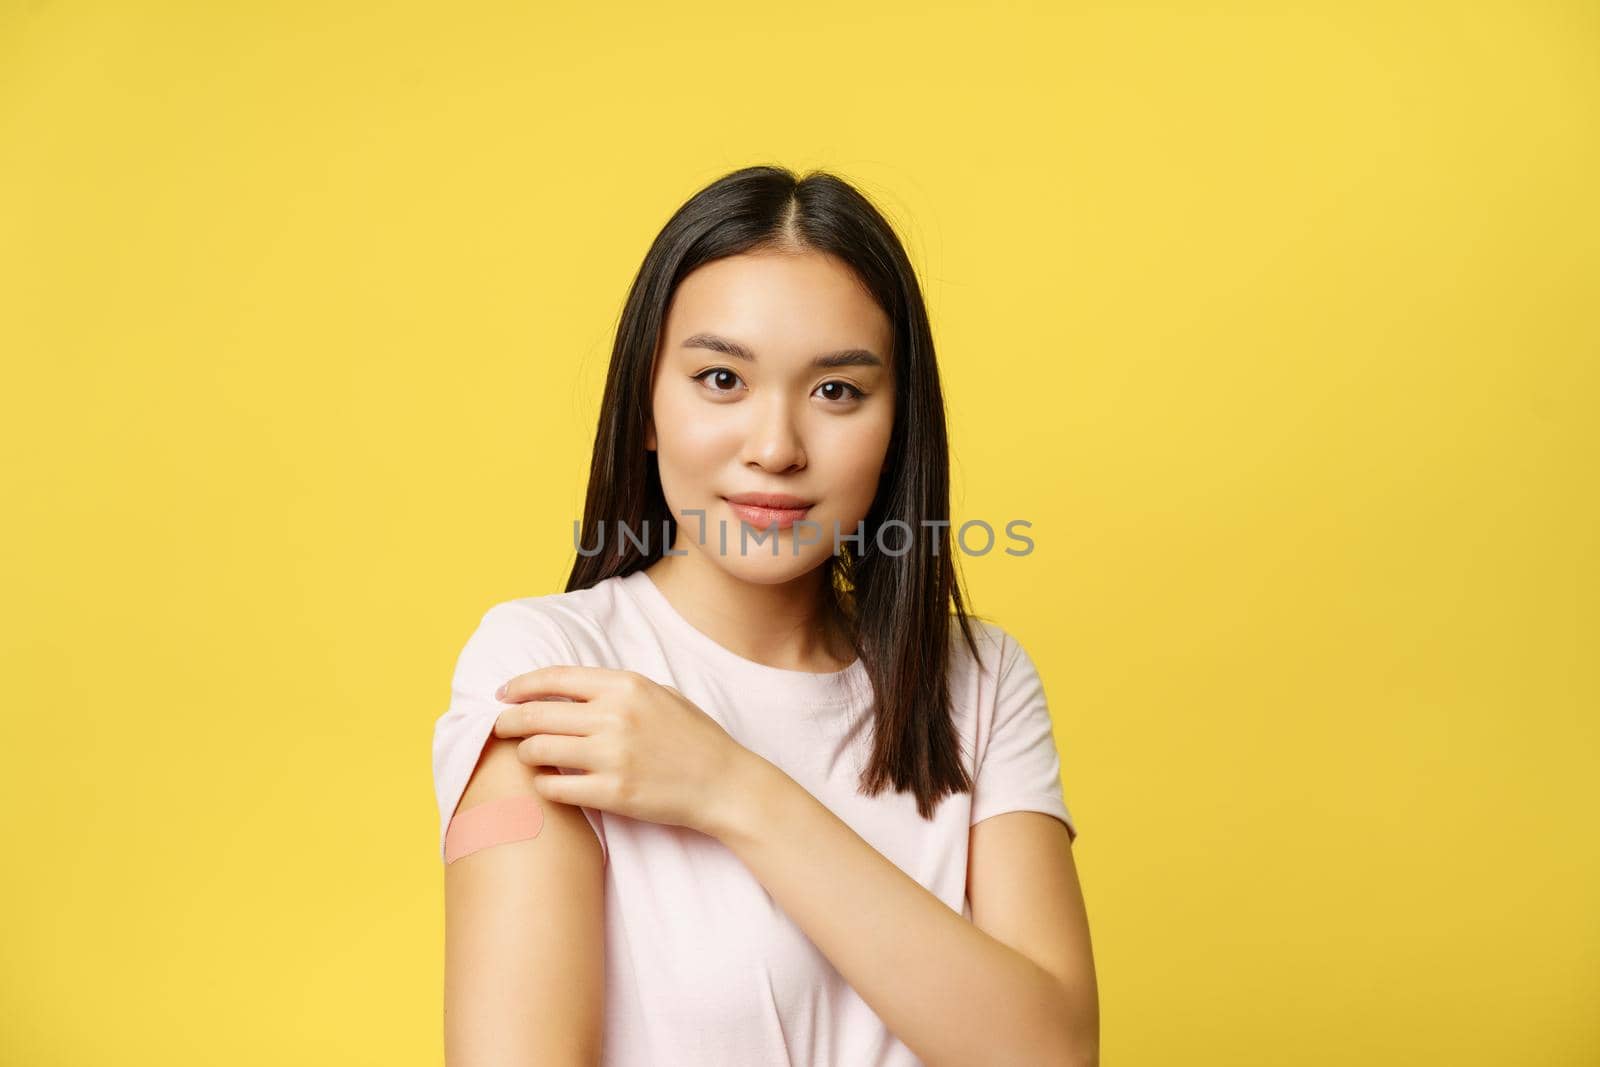 Covid-19 and healthcare medical concept. Smiling korean girl shows shoulder with patch, took shot of coronavirus vaccine during pandemic, yellow background.